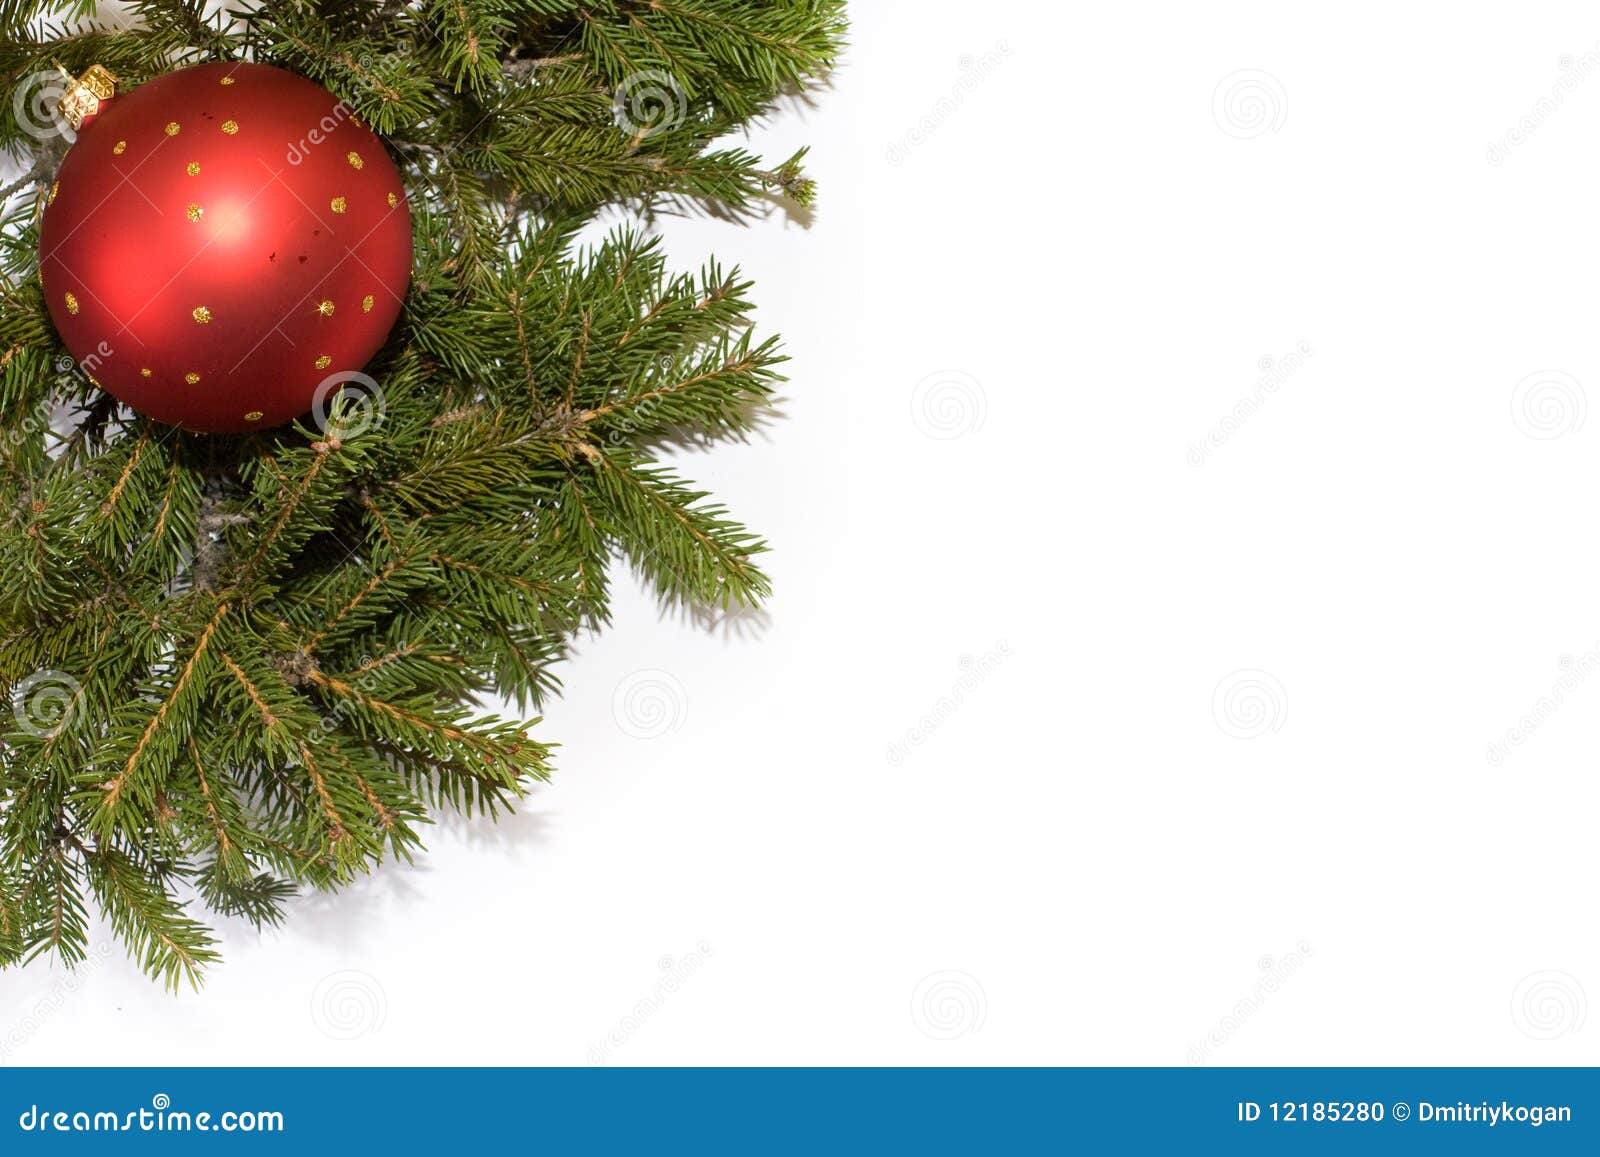 Christmas frame stock photo. Image of cold, december - 12185280